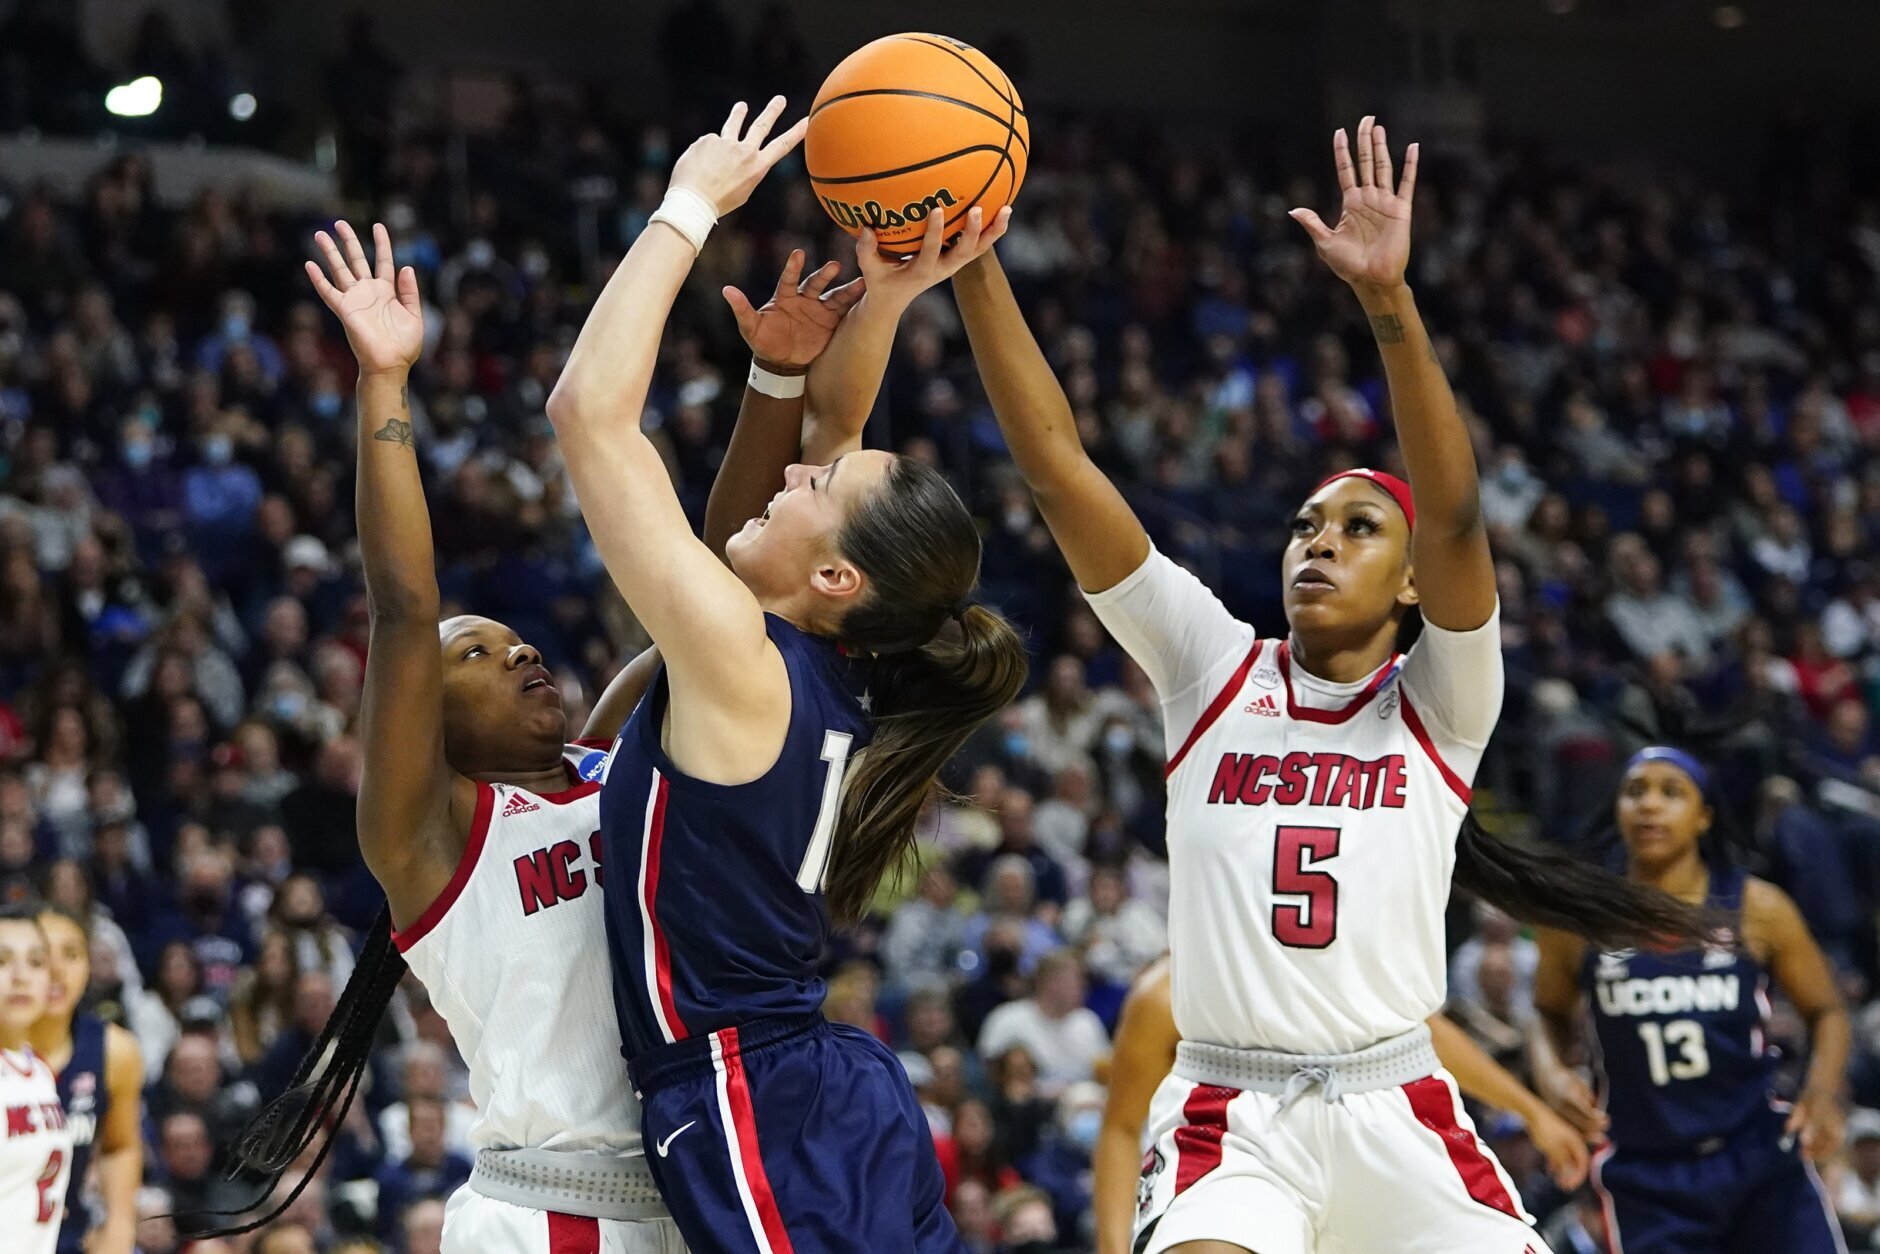 A long journey has UConn as 'The Team to Beat' entering the Final Four